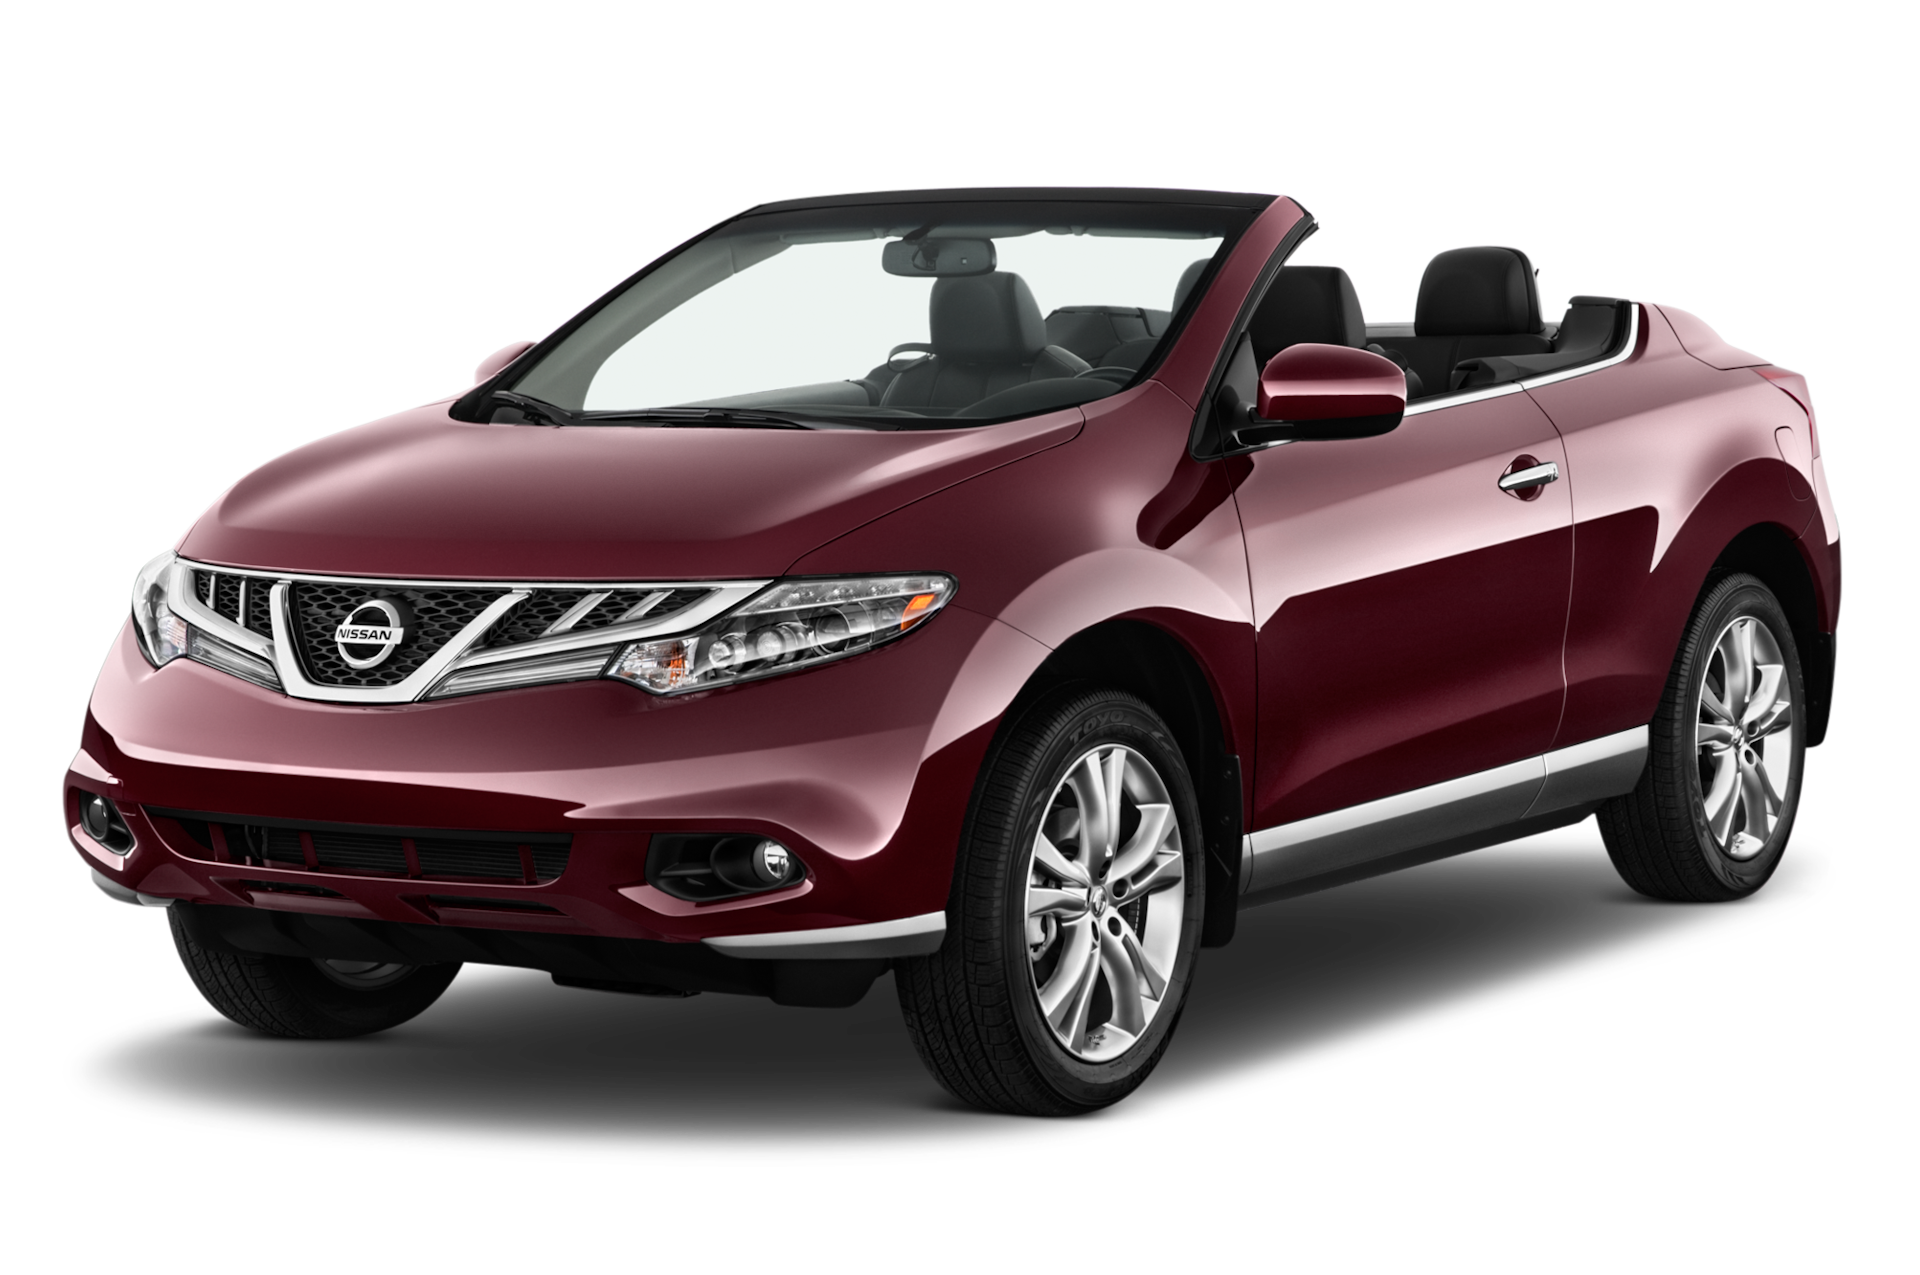 2014 Nissan Murano CrossCabriolet Prices, Reviews, and Photos - MotorTrend